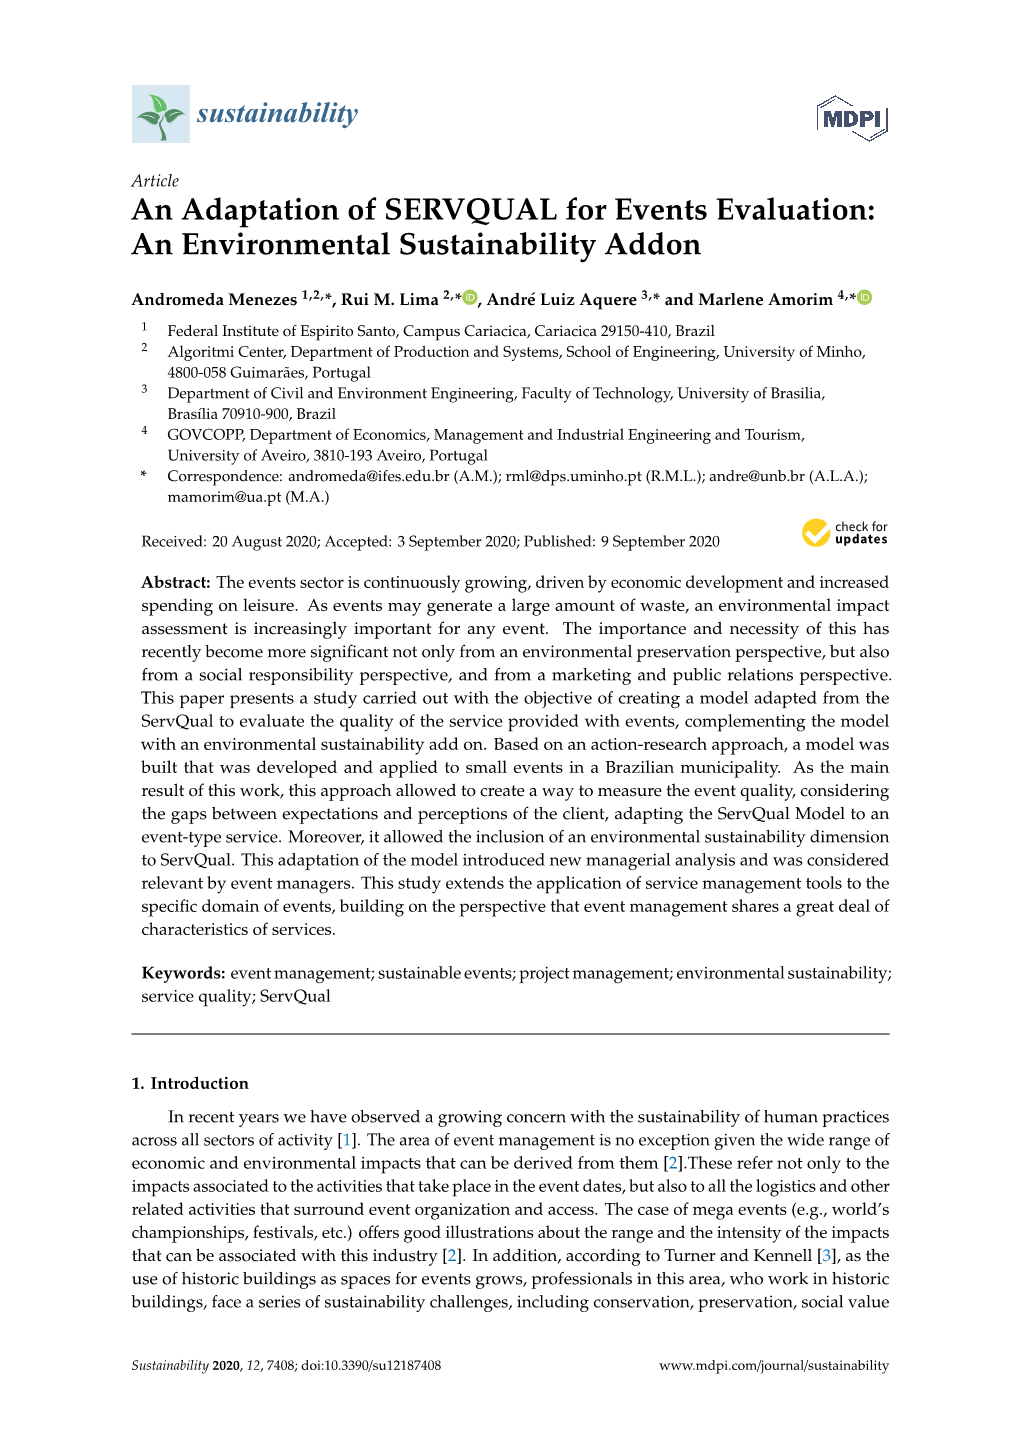 An Adaptation of SERVQUAL for Events Evaluation: an Environmental Sustainability Addon